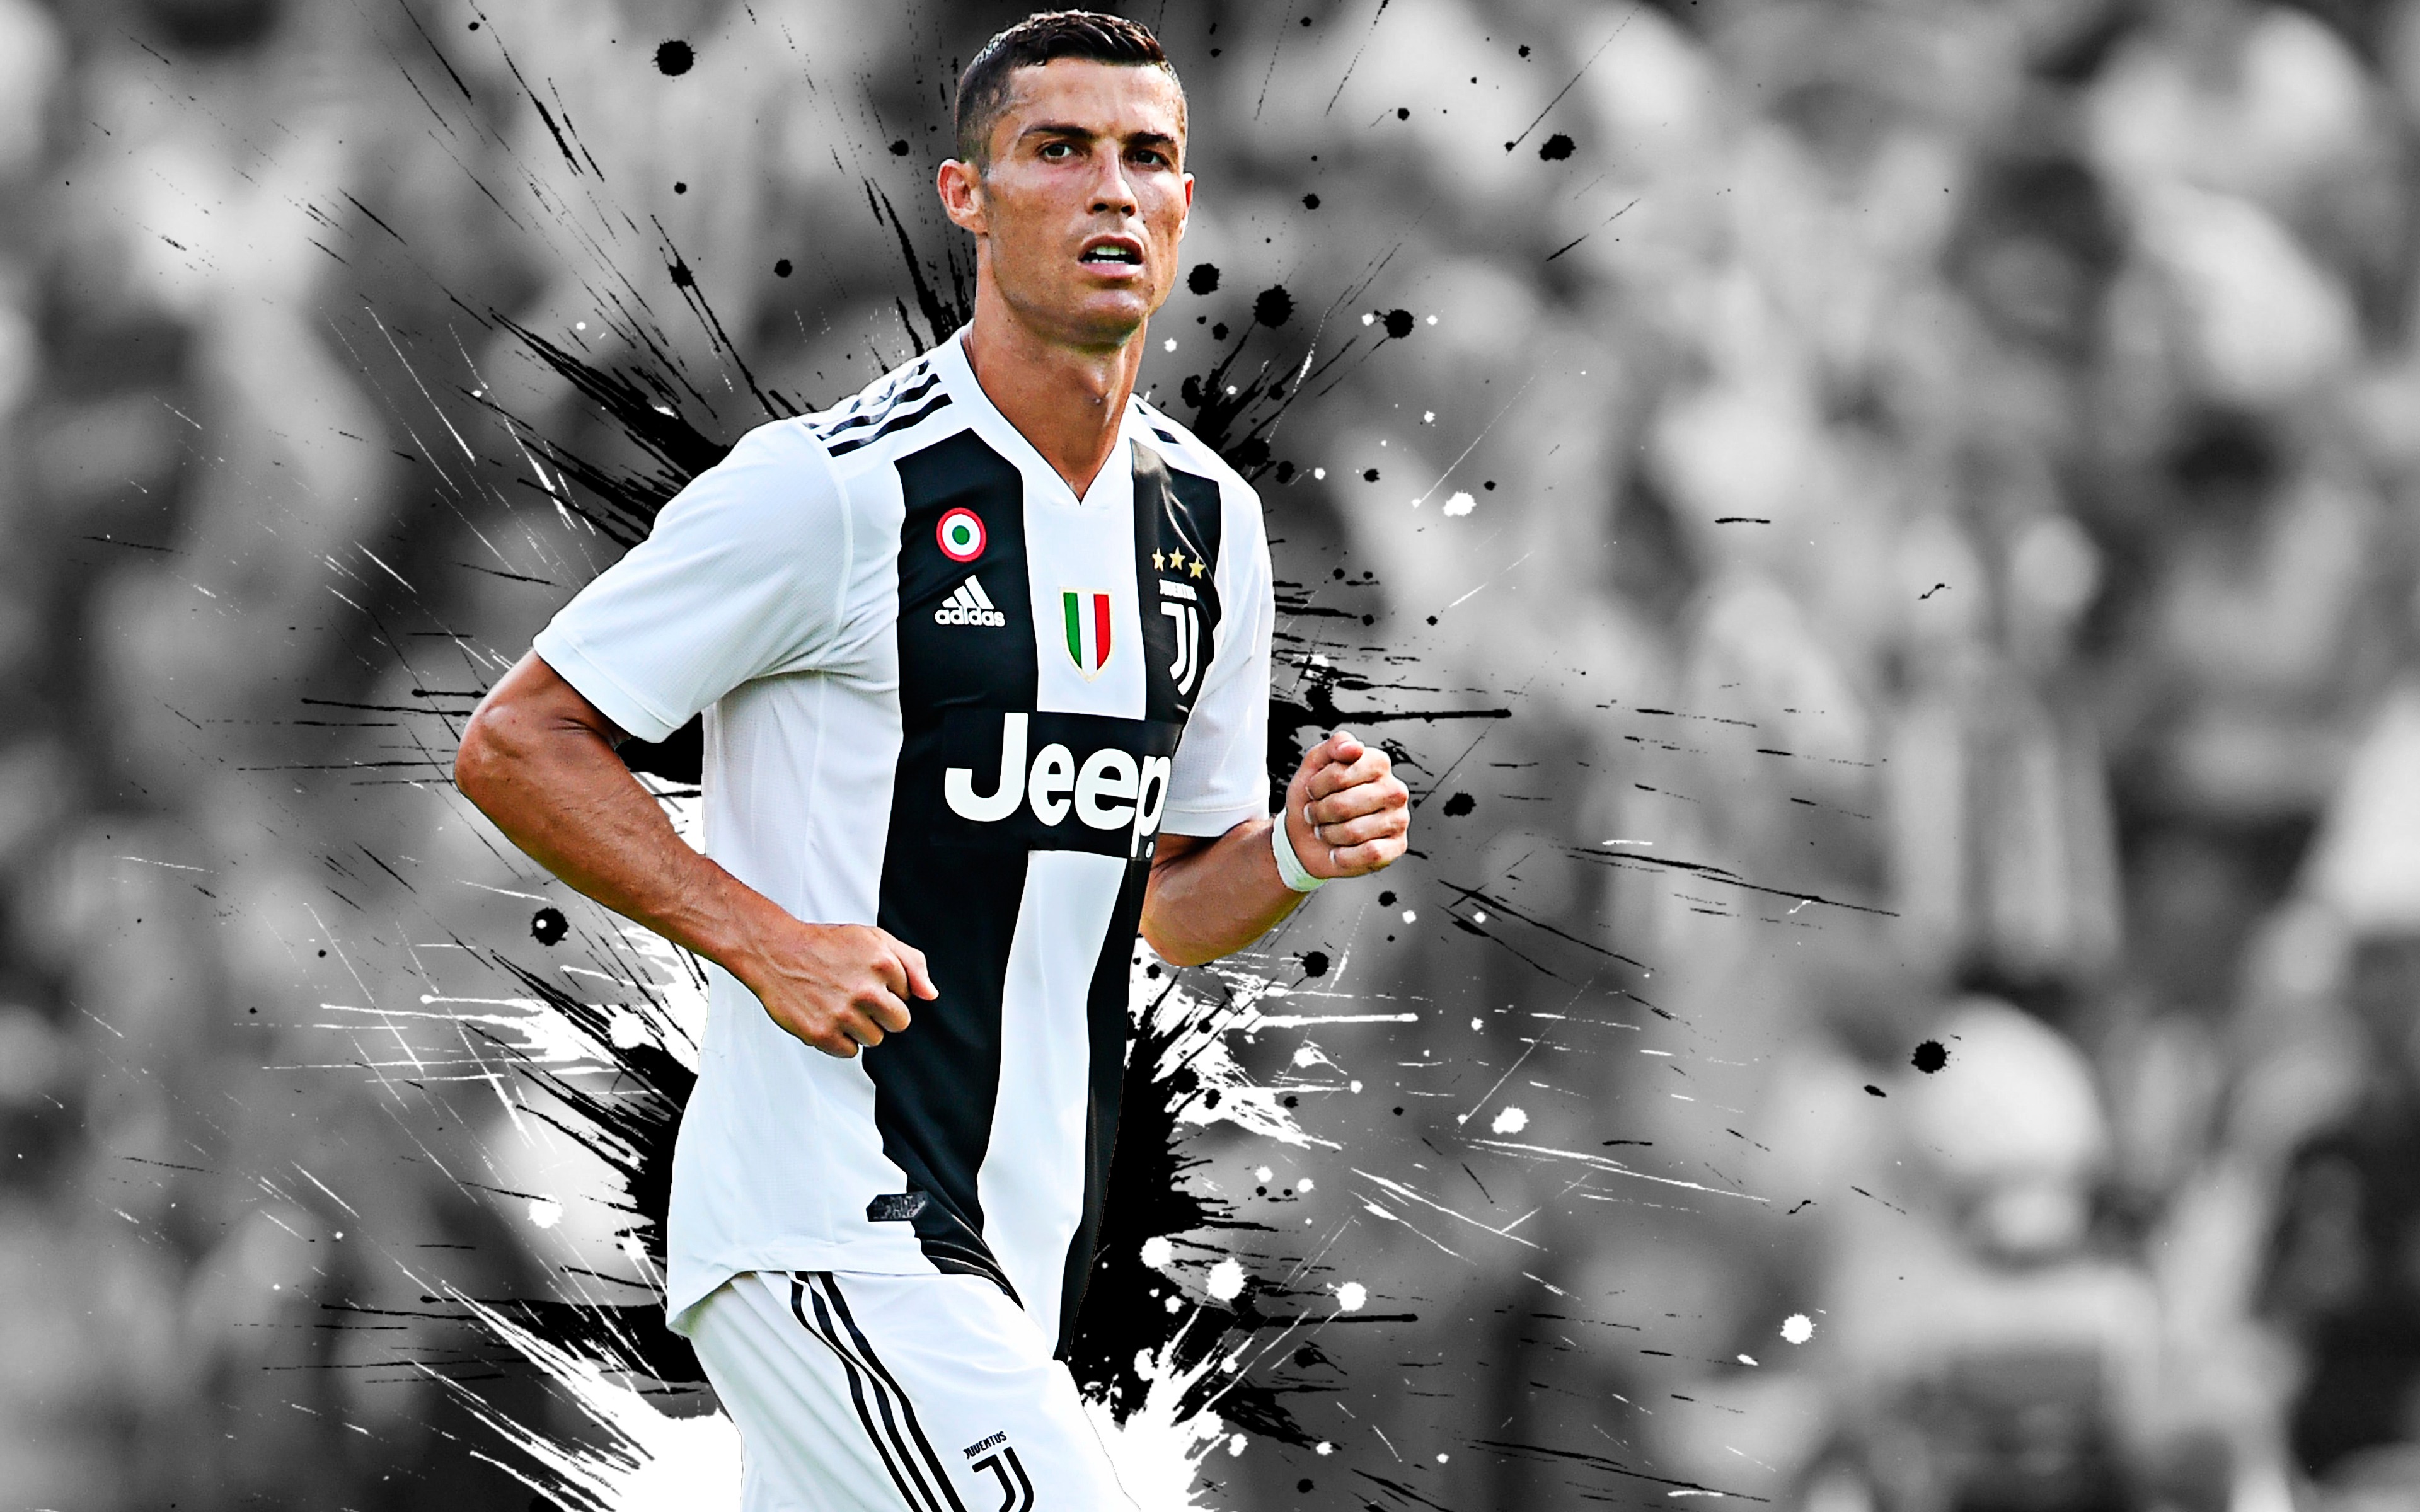 200 Cristiano Ronaldo Wallpapers Download In High Quality - Ronaldo  Juventus Wallpaper 4k - 3840x2400 Wallpaper 